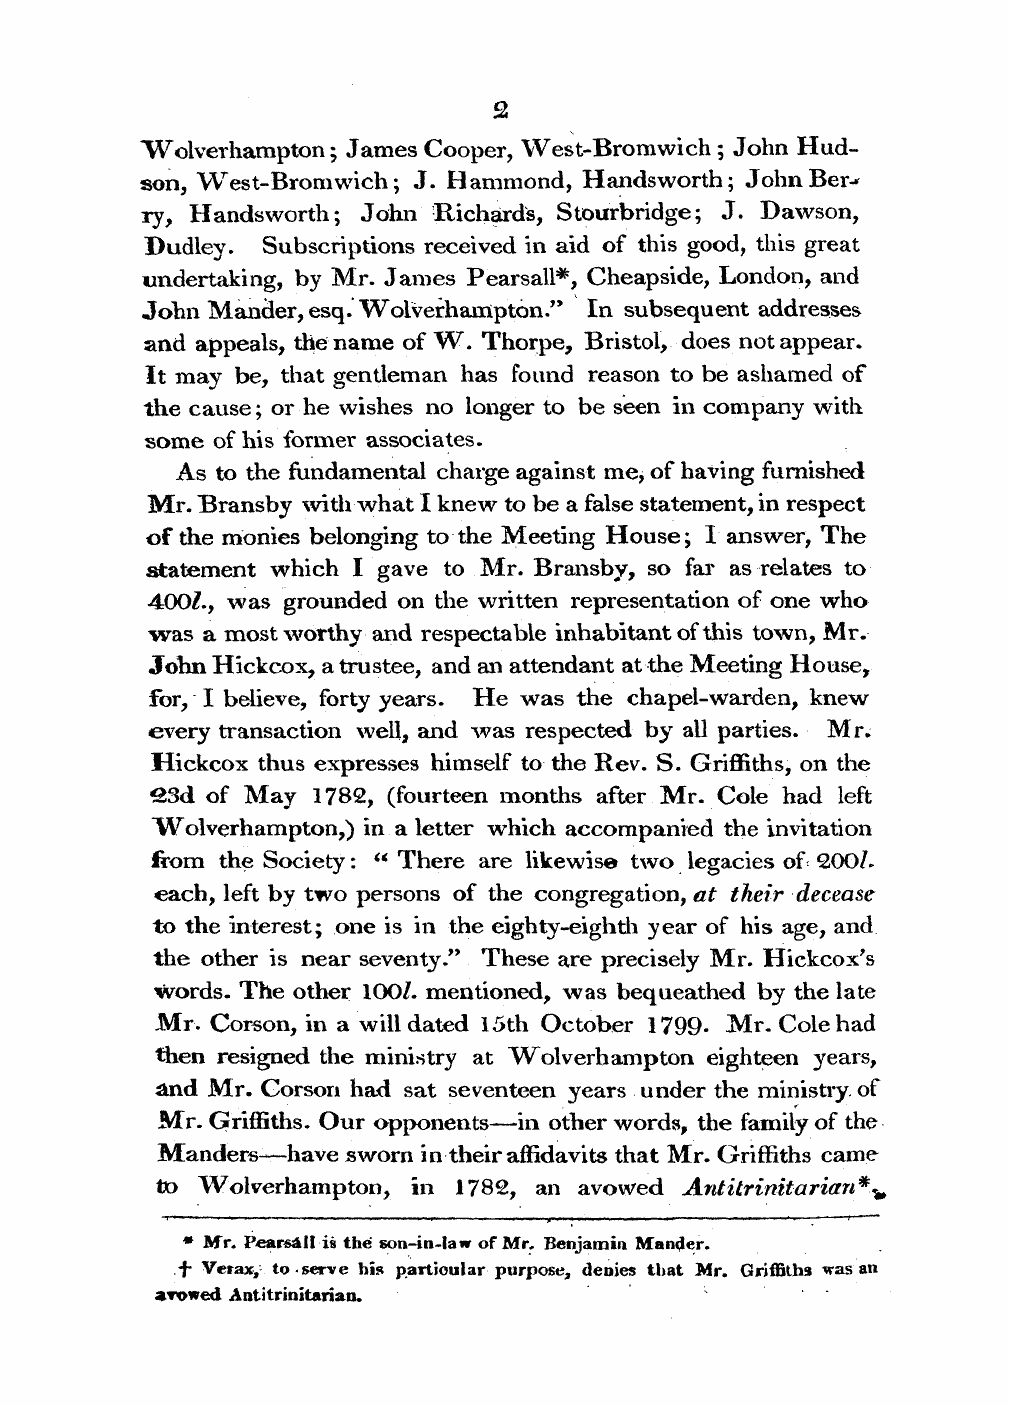 Monthly Repository (1806-1838) and Unitarian Chronicle (1832-1833): F Y, 1st edition, Supplement: 2